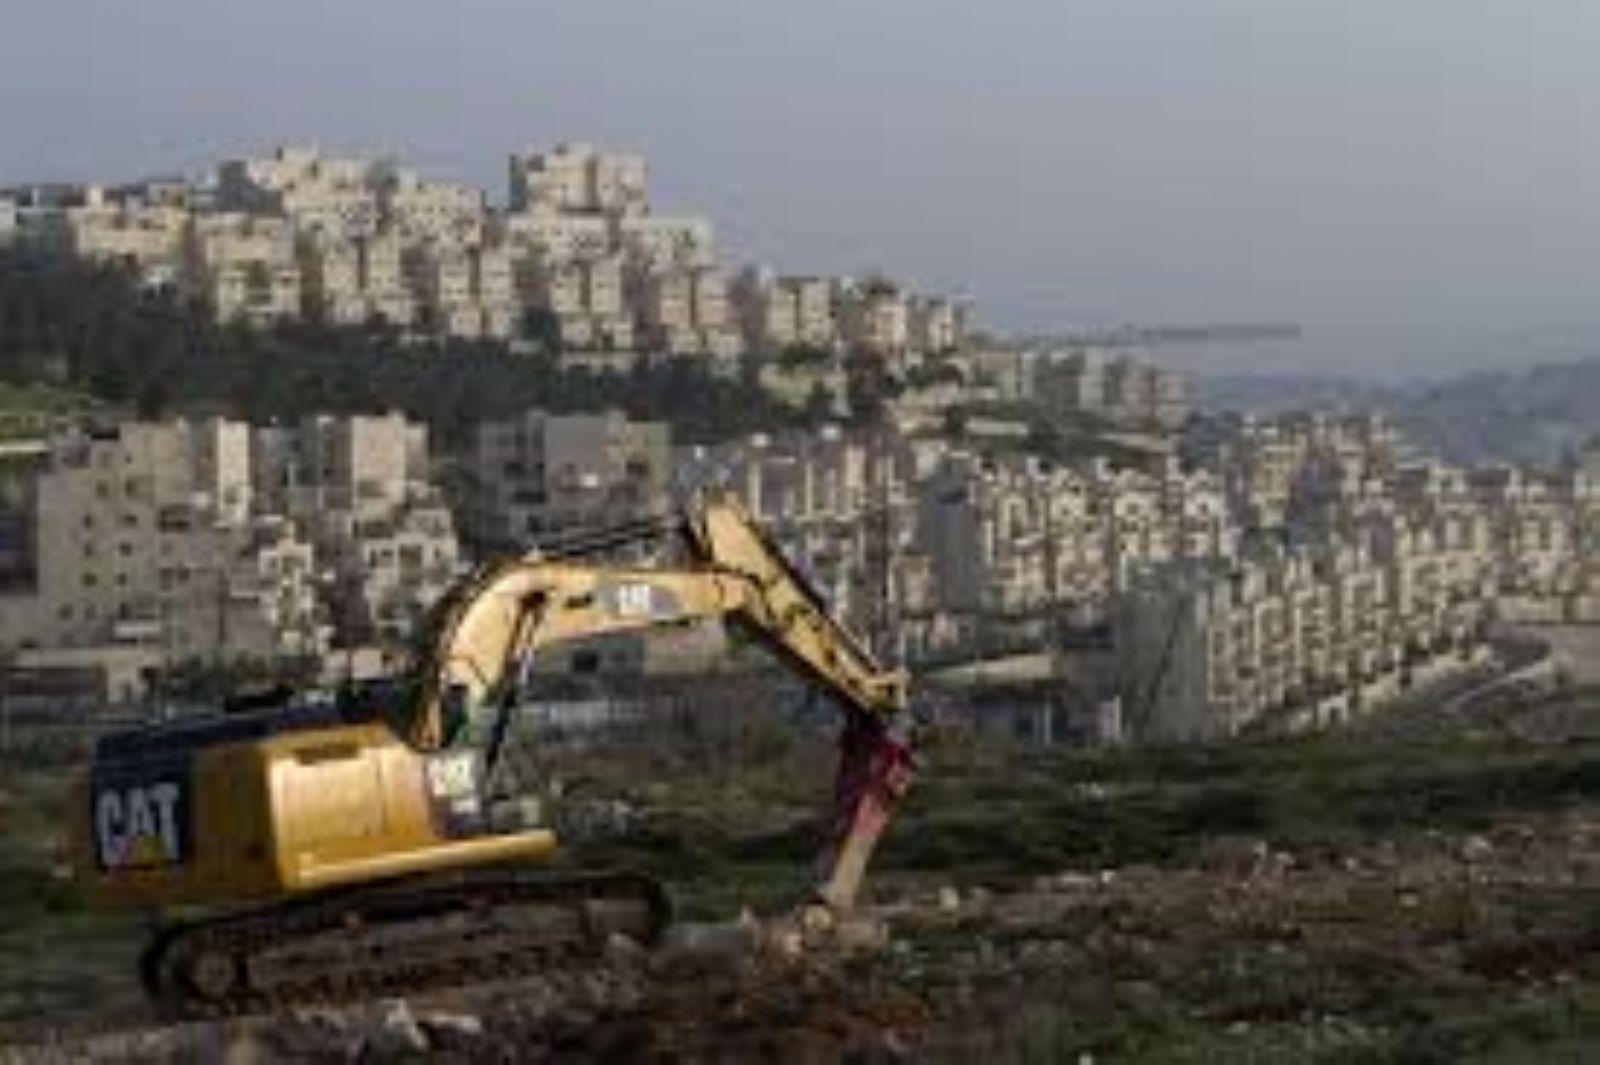 New settlements in the Jordan Valley,   Judaization of the Occupied Jerusalem Continues